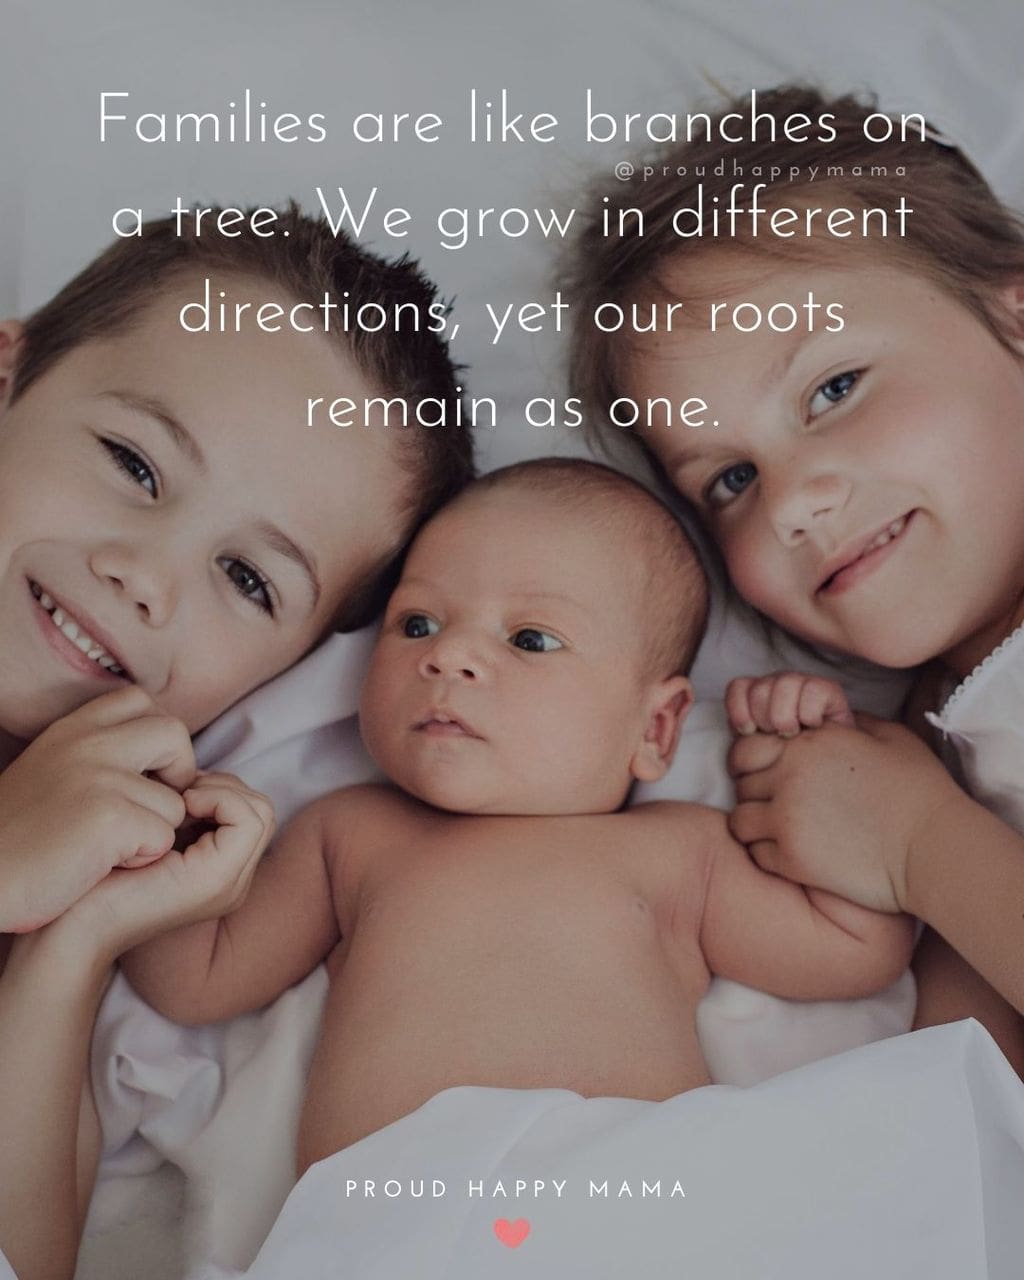 Quotes About Family | Families are like branches on a tree. We grow in different directions, yet our roots remain as one.